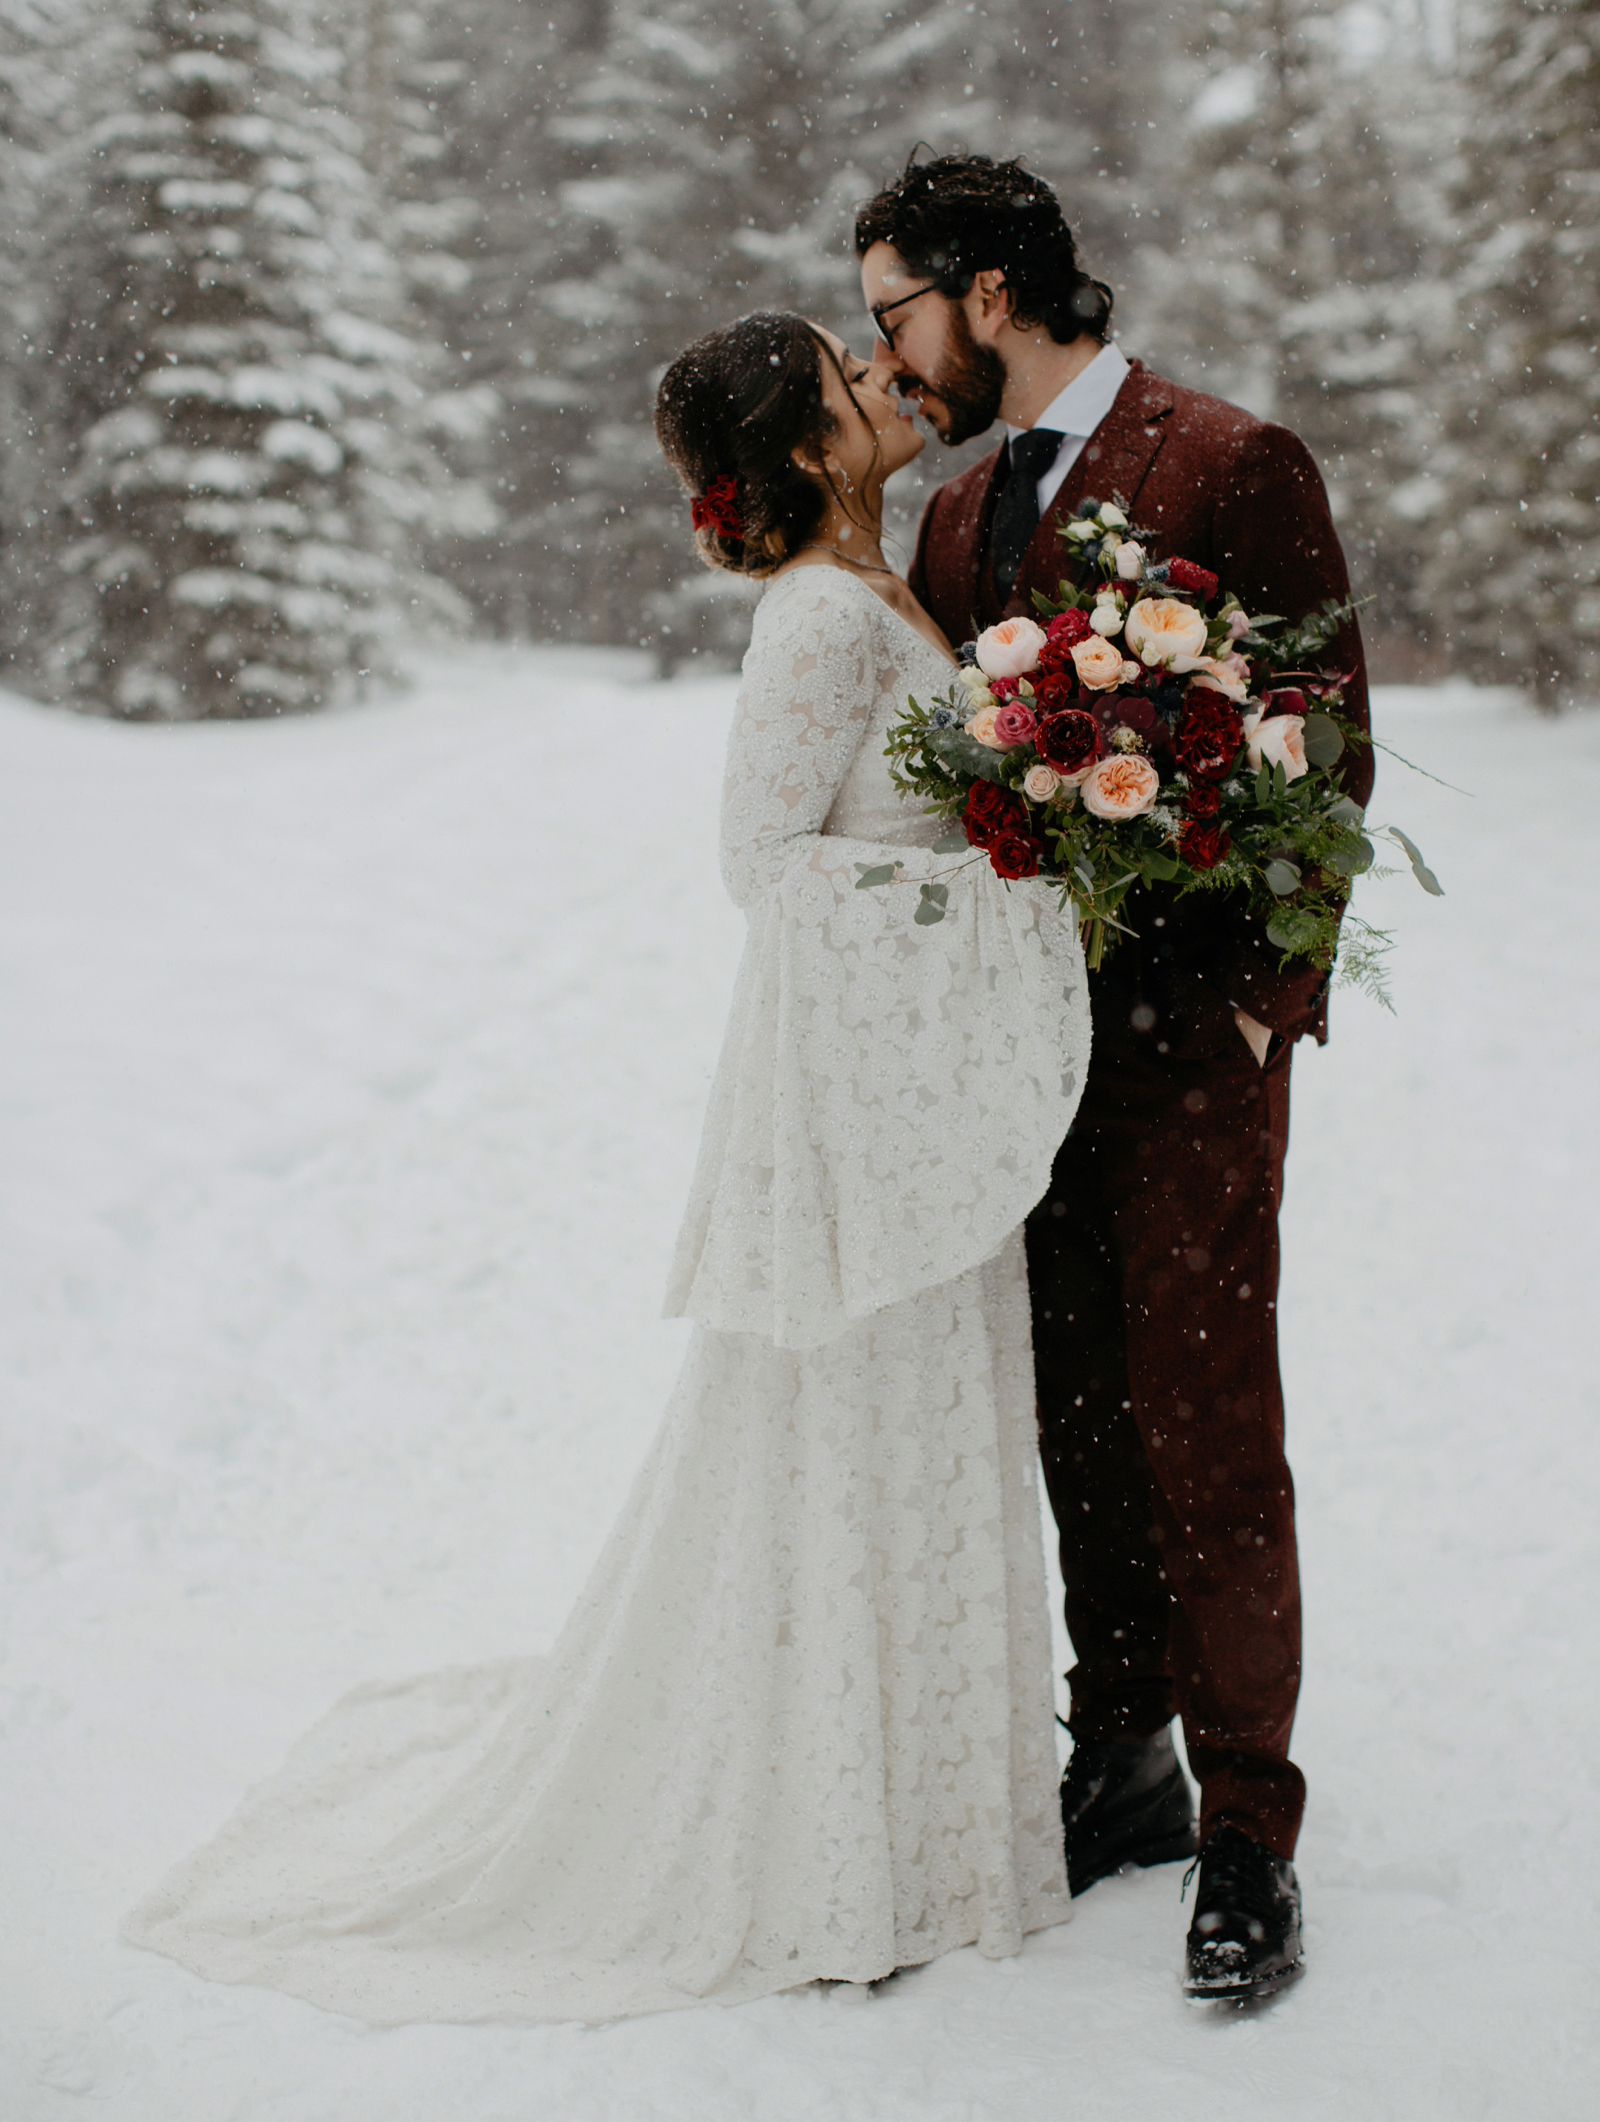 Stylish couple with maroon groom suit and bell sleeved sequence bridal dress in water snowstorm